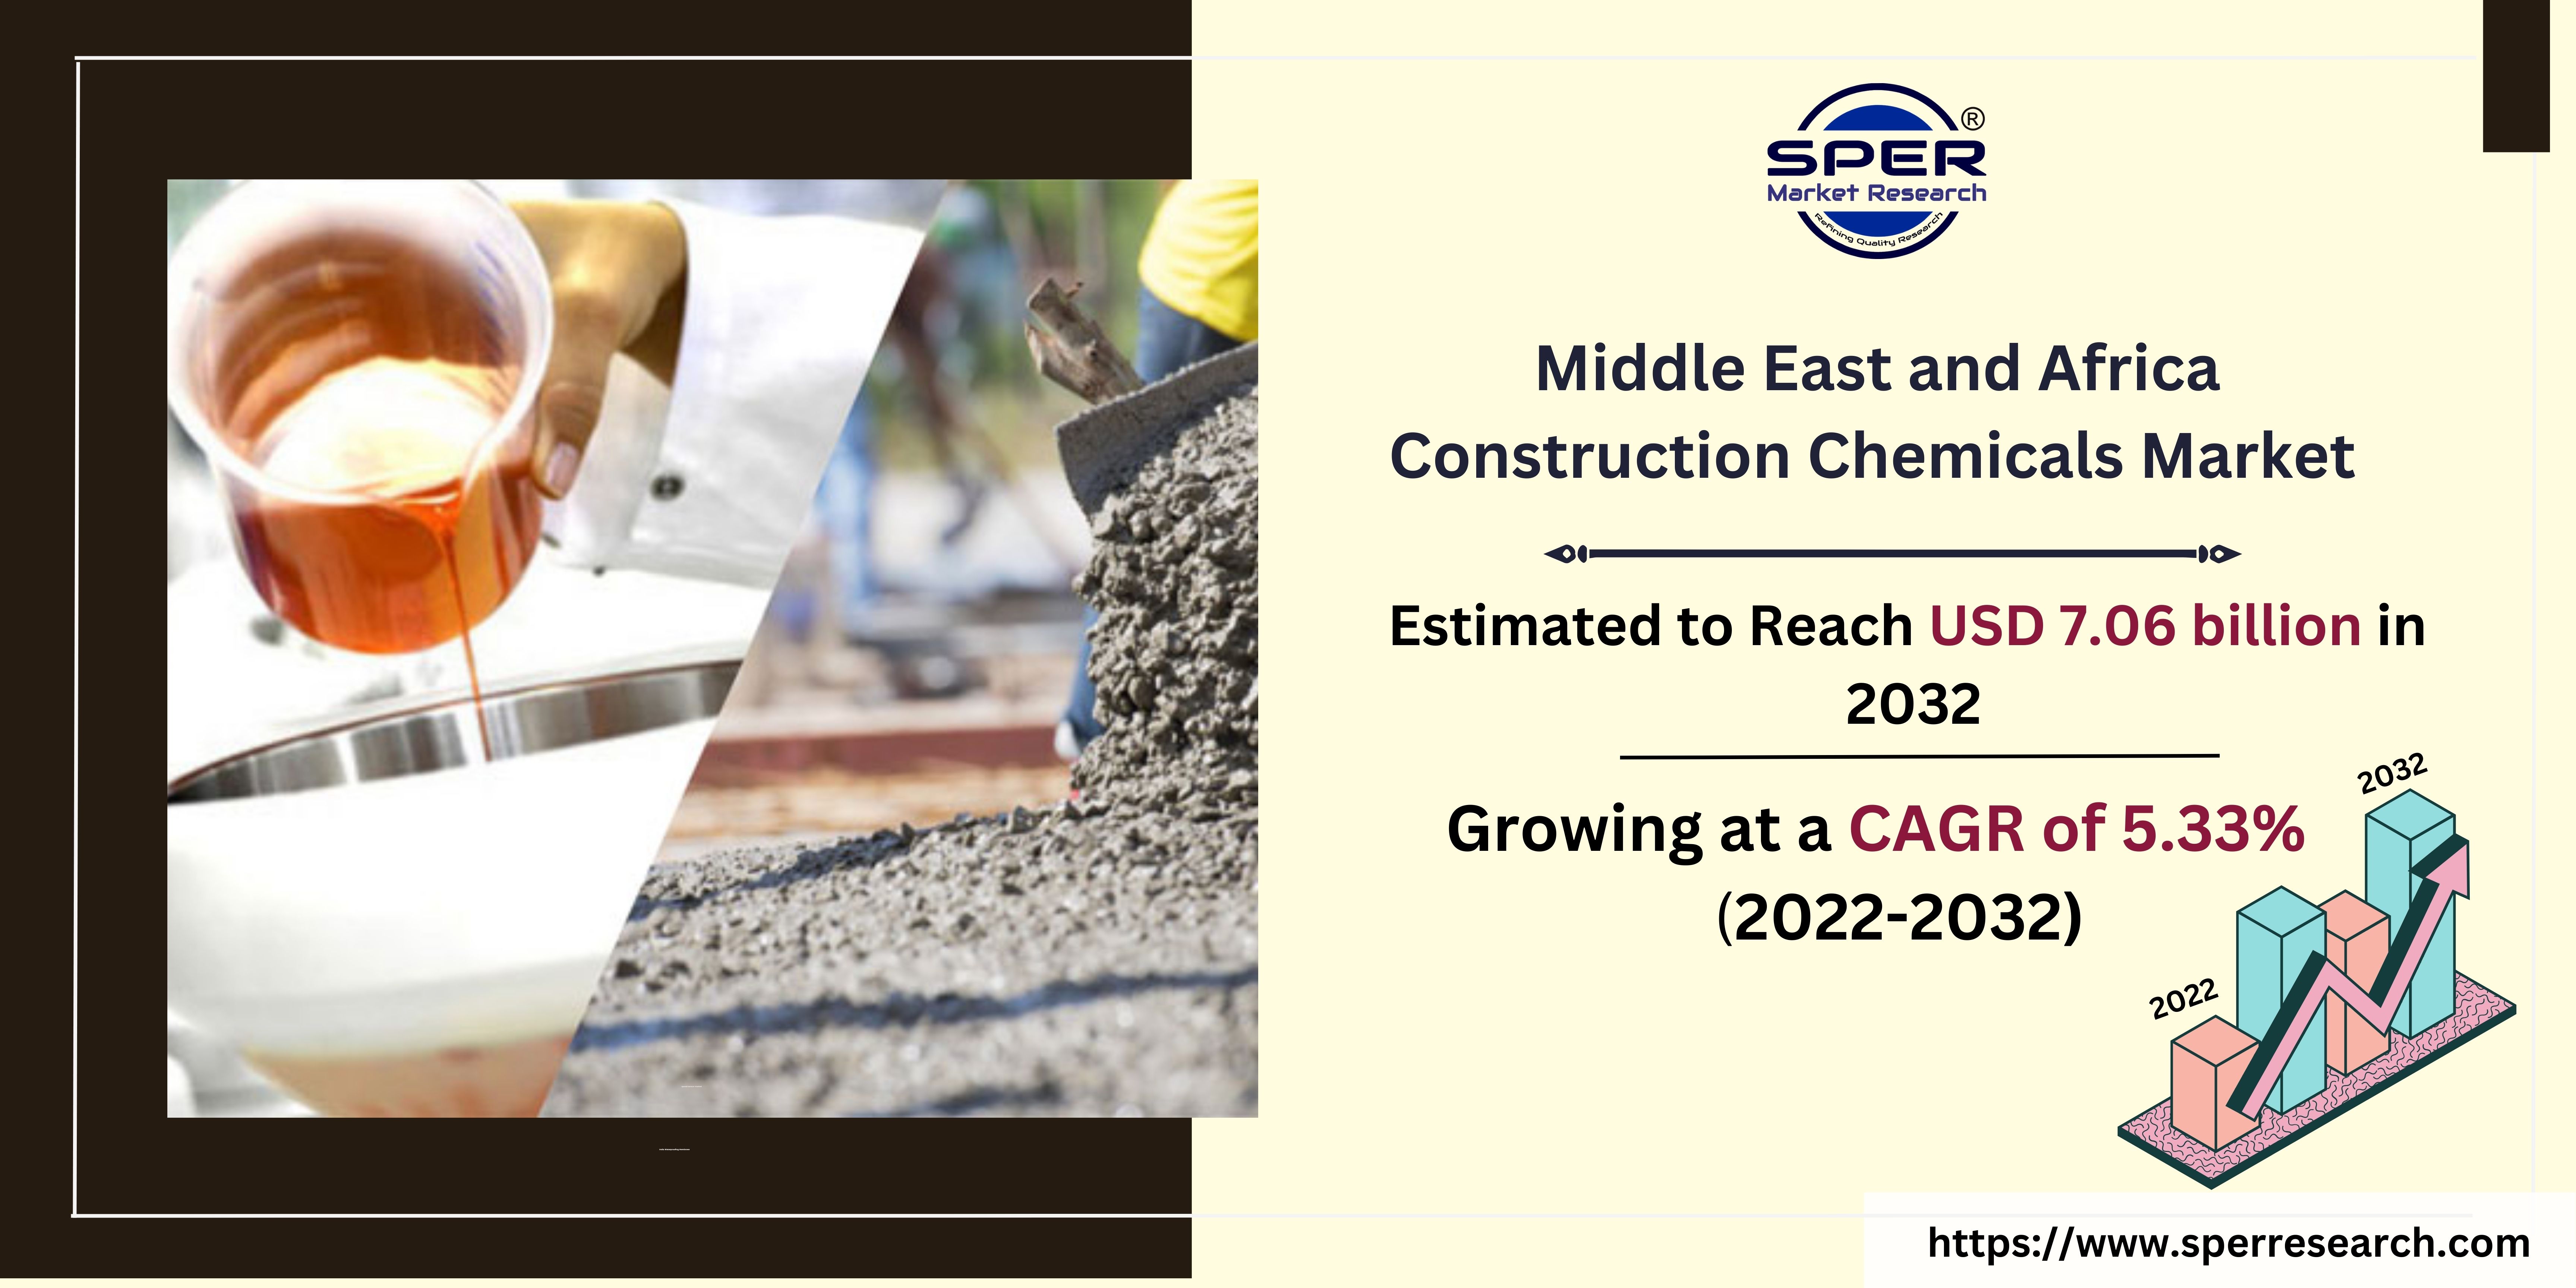 Middle East and Africa Construction Chemicals Market 